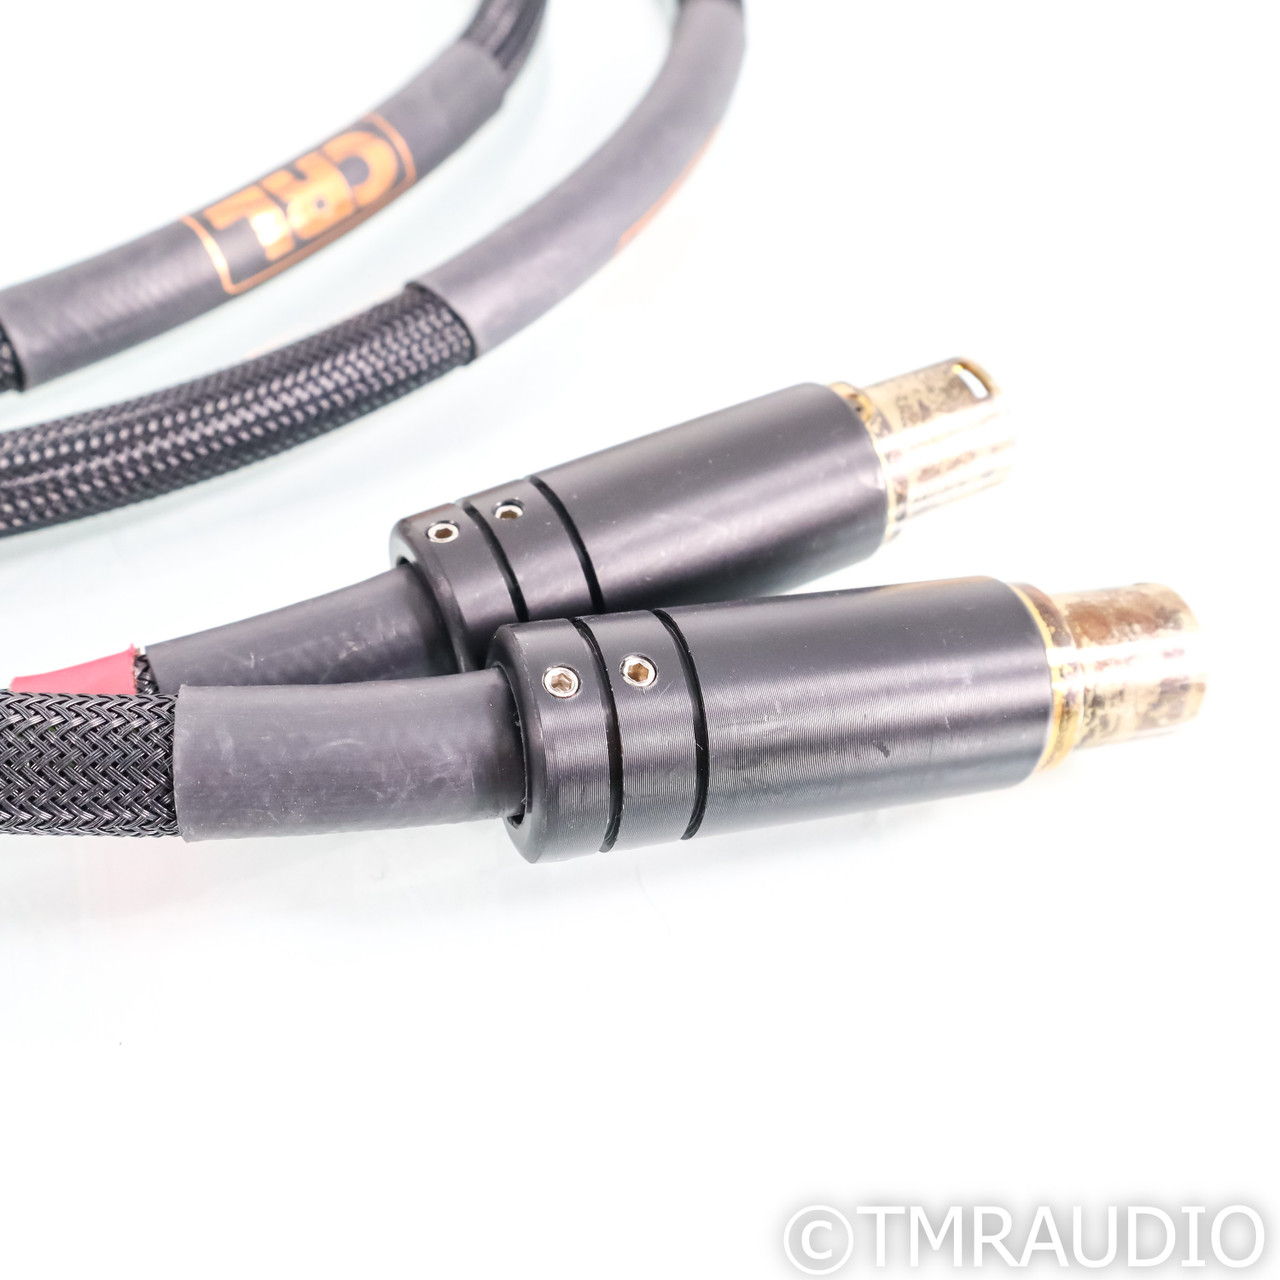 Cable Research Lab Bronze XLR Cables; 2m Pair Balanced ... 6